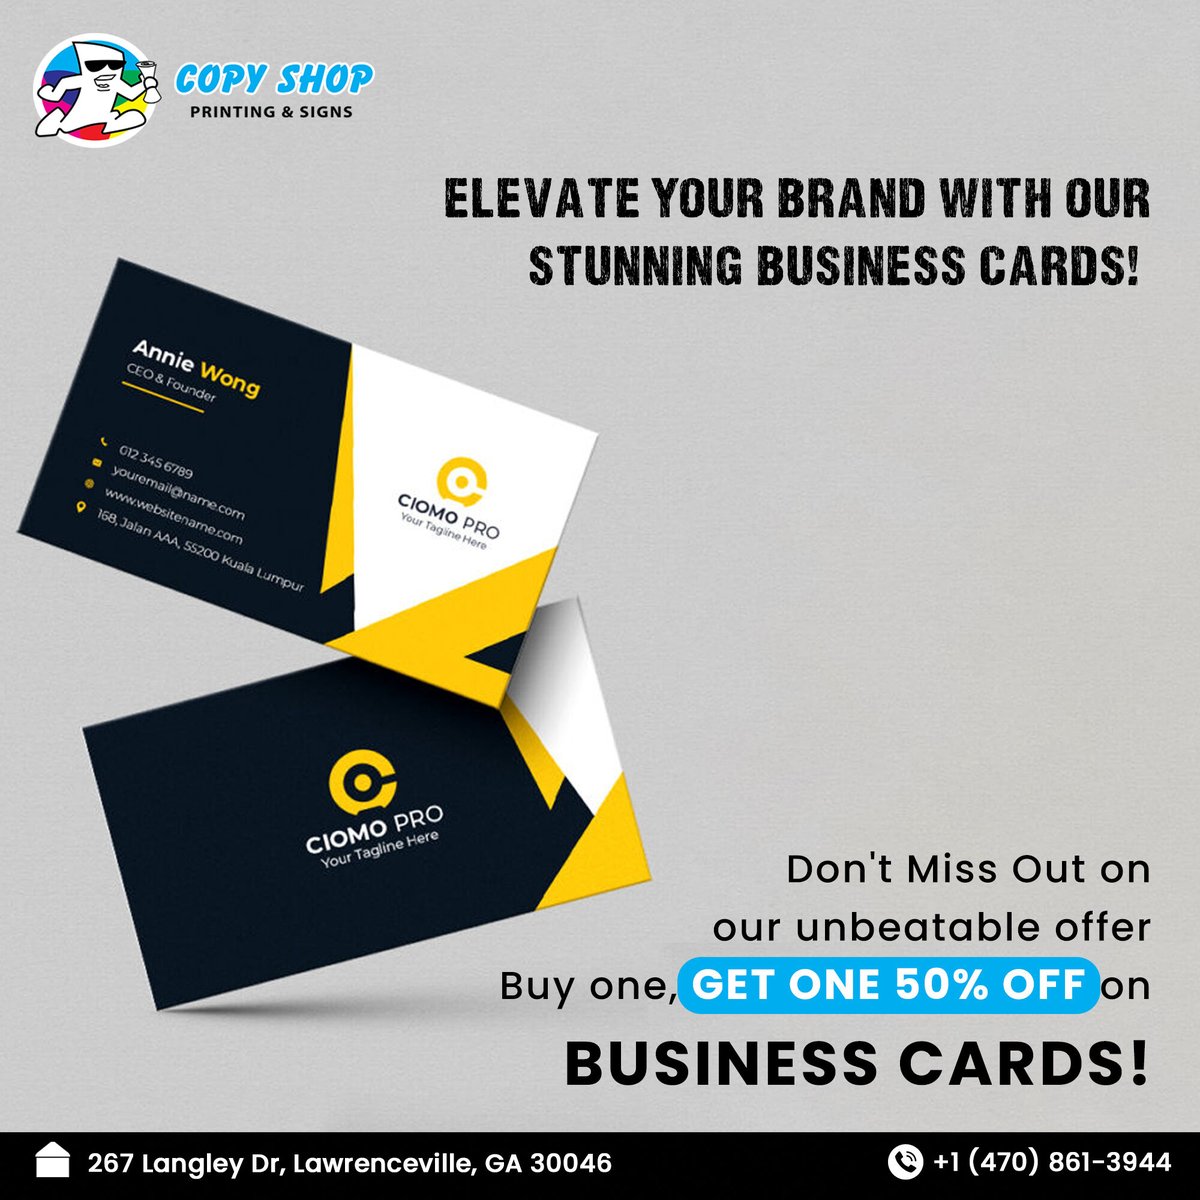 Stand out from the crowd with our eye-catching business cards! 🌟 Elevate your brand's image and leave a lasting impression. Buy one, get one 50% off now. Make every connection count!
#copyshop #copyshopprinting #printing #businesscards #businesscardsdesign #businesscardsprinting